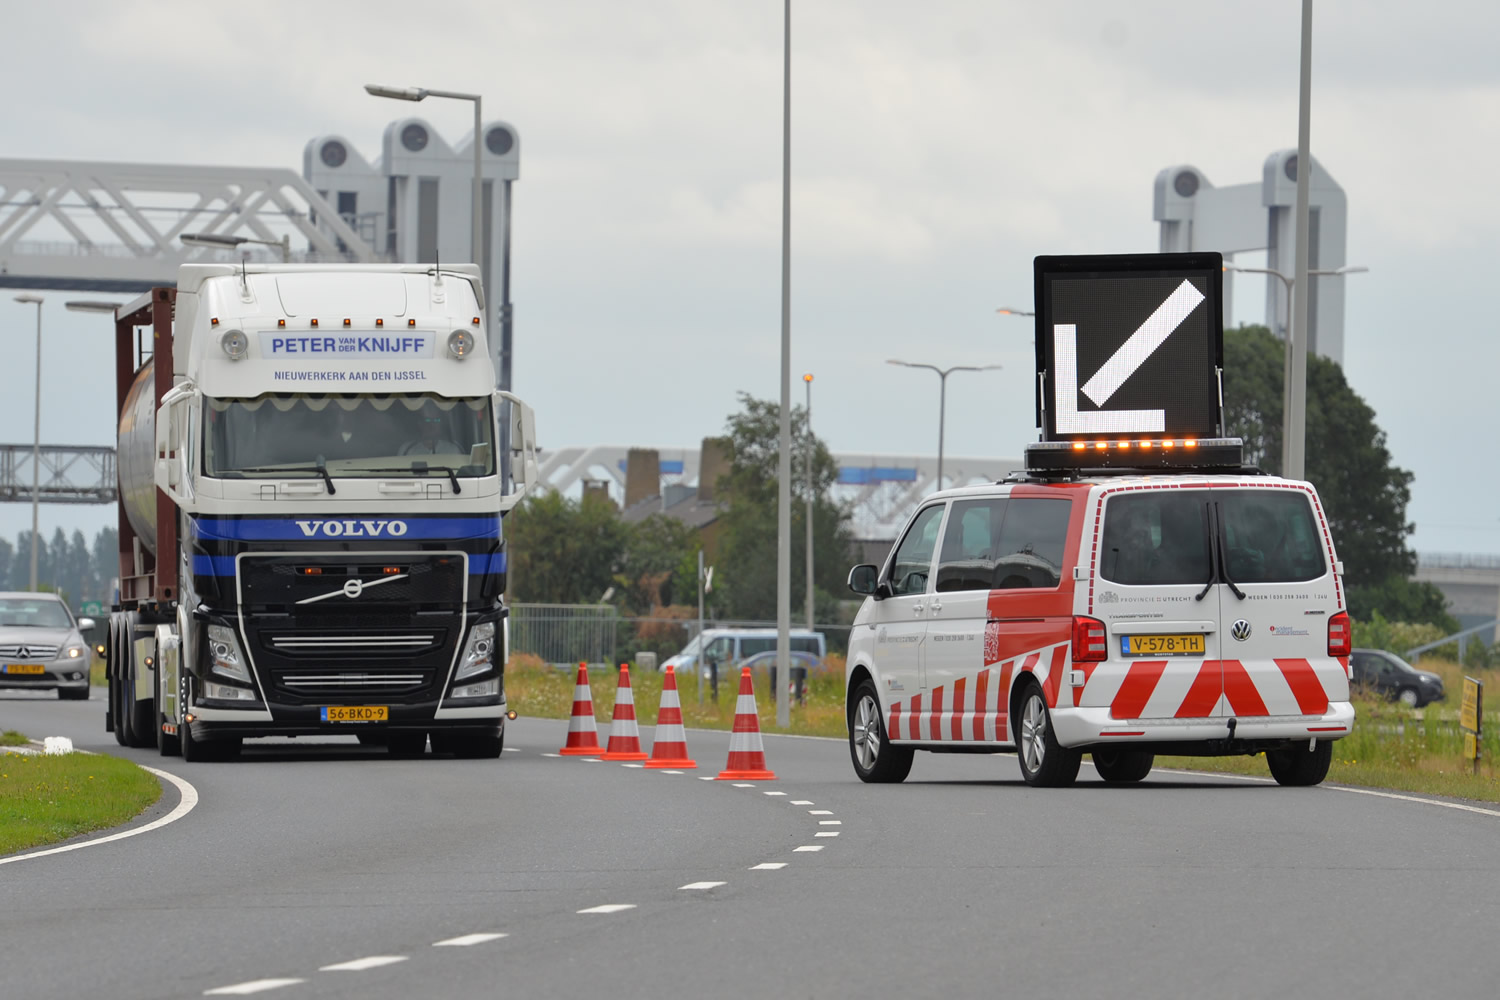 Roof mounted vehicles as new generation Road inspection vehicles for Rijkswaterstaat and Provincies